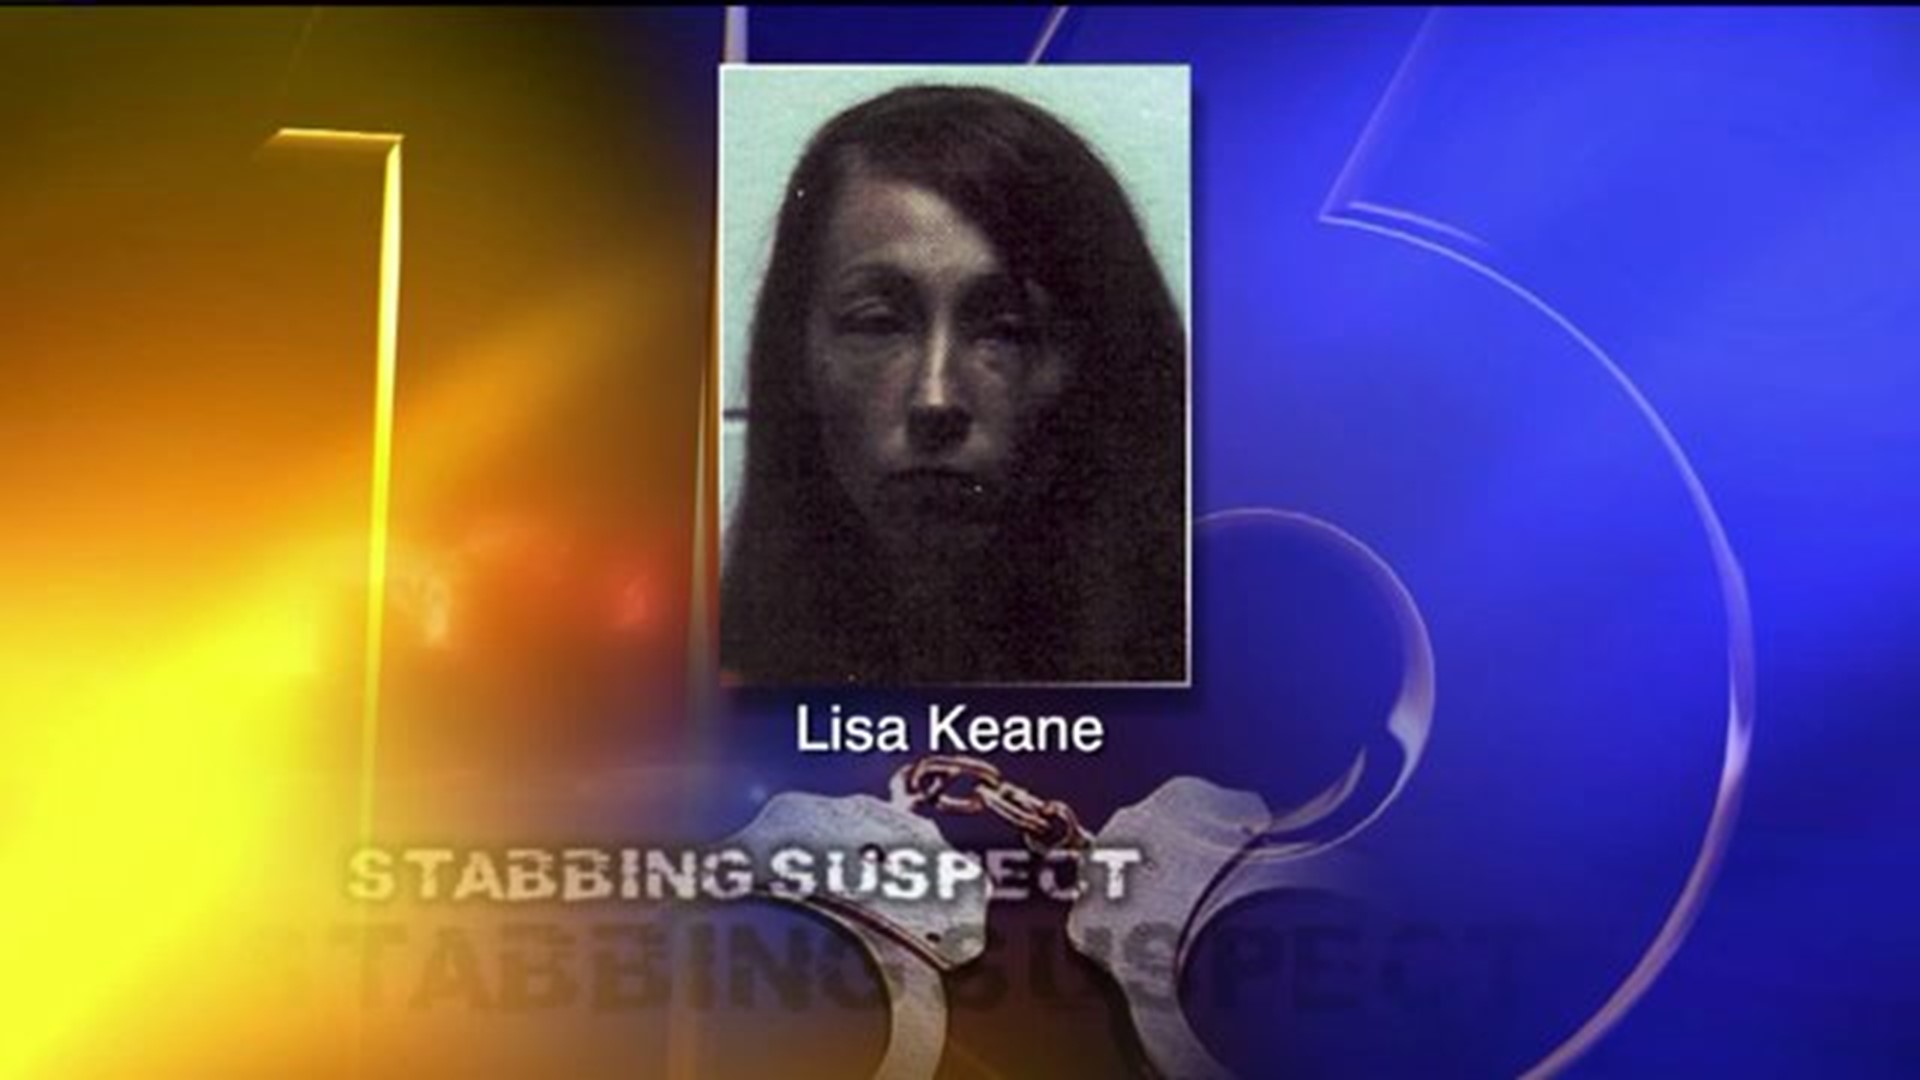 Woman Locked up After Stabbing